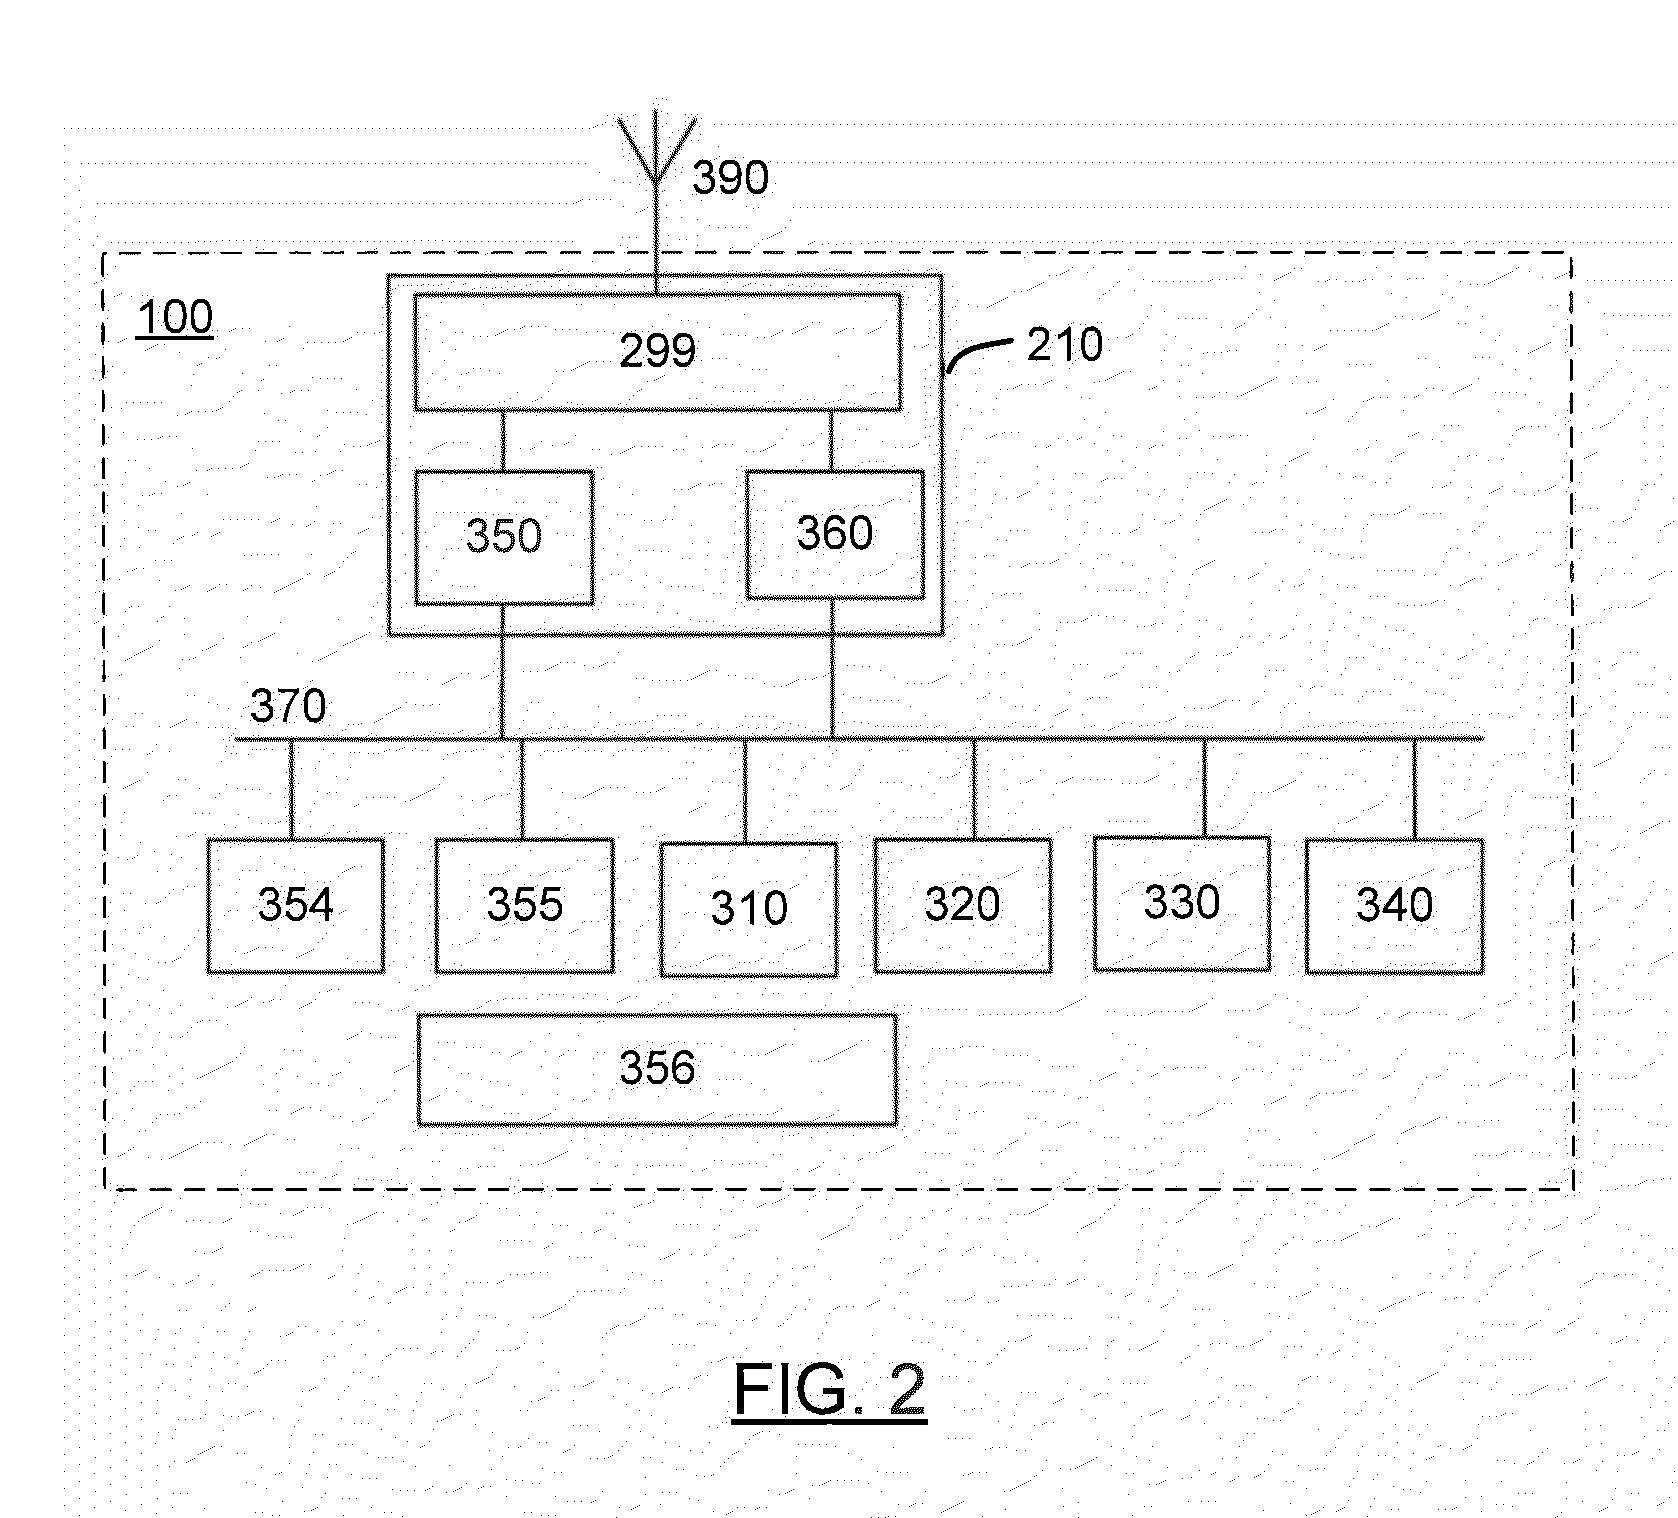 Encoded information reading terminal with micro-electromechanical radio frequency front end